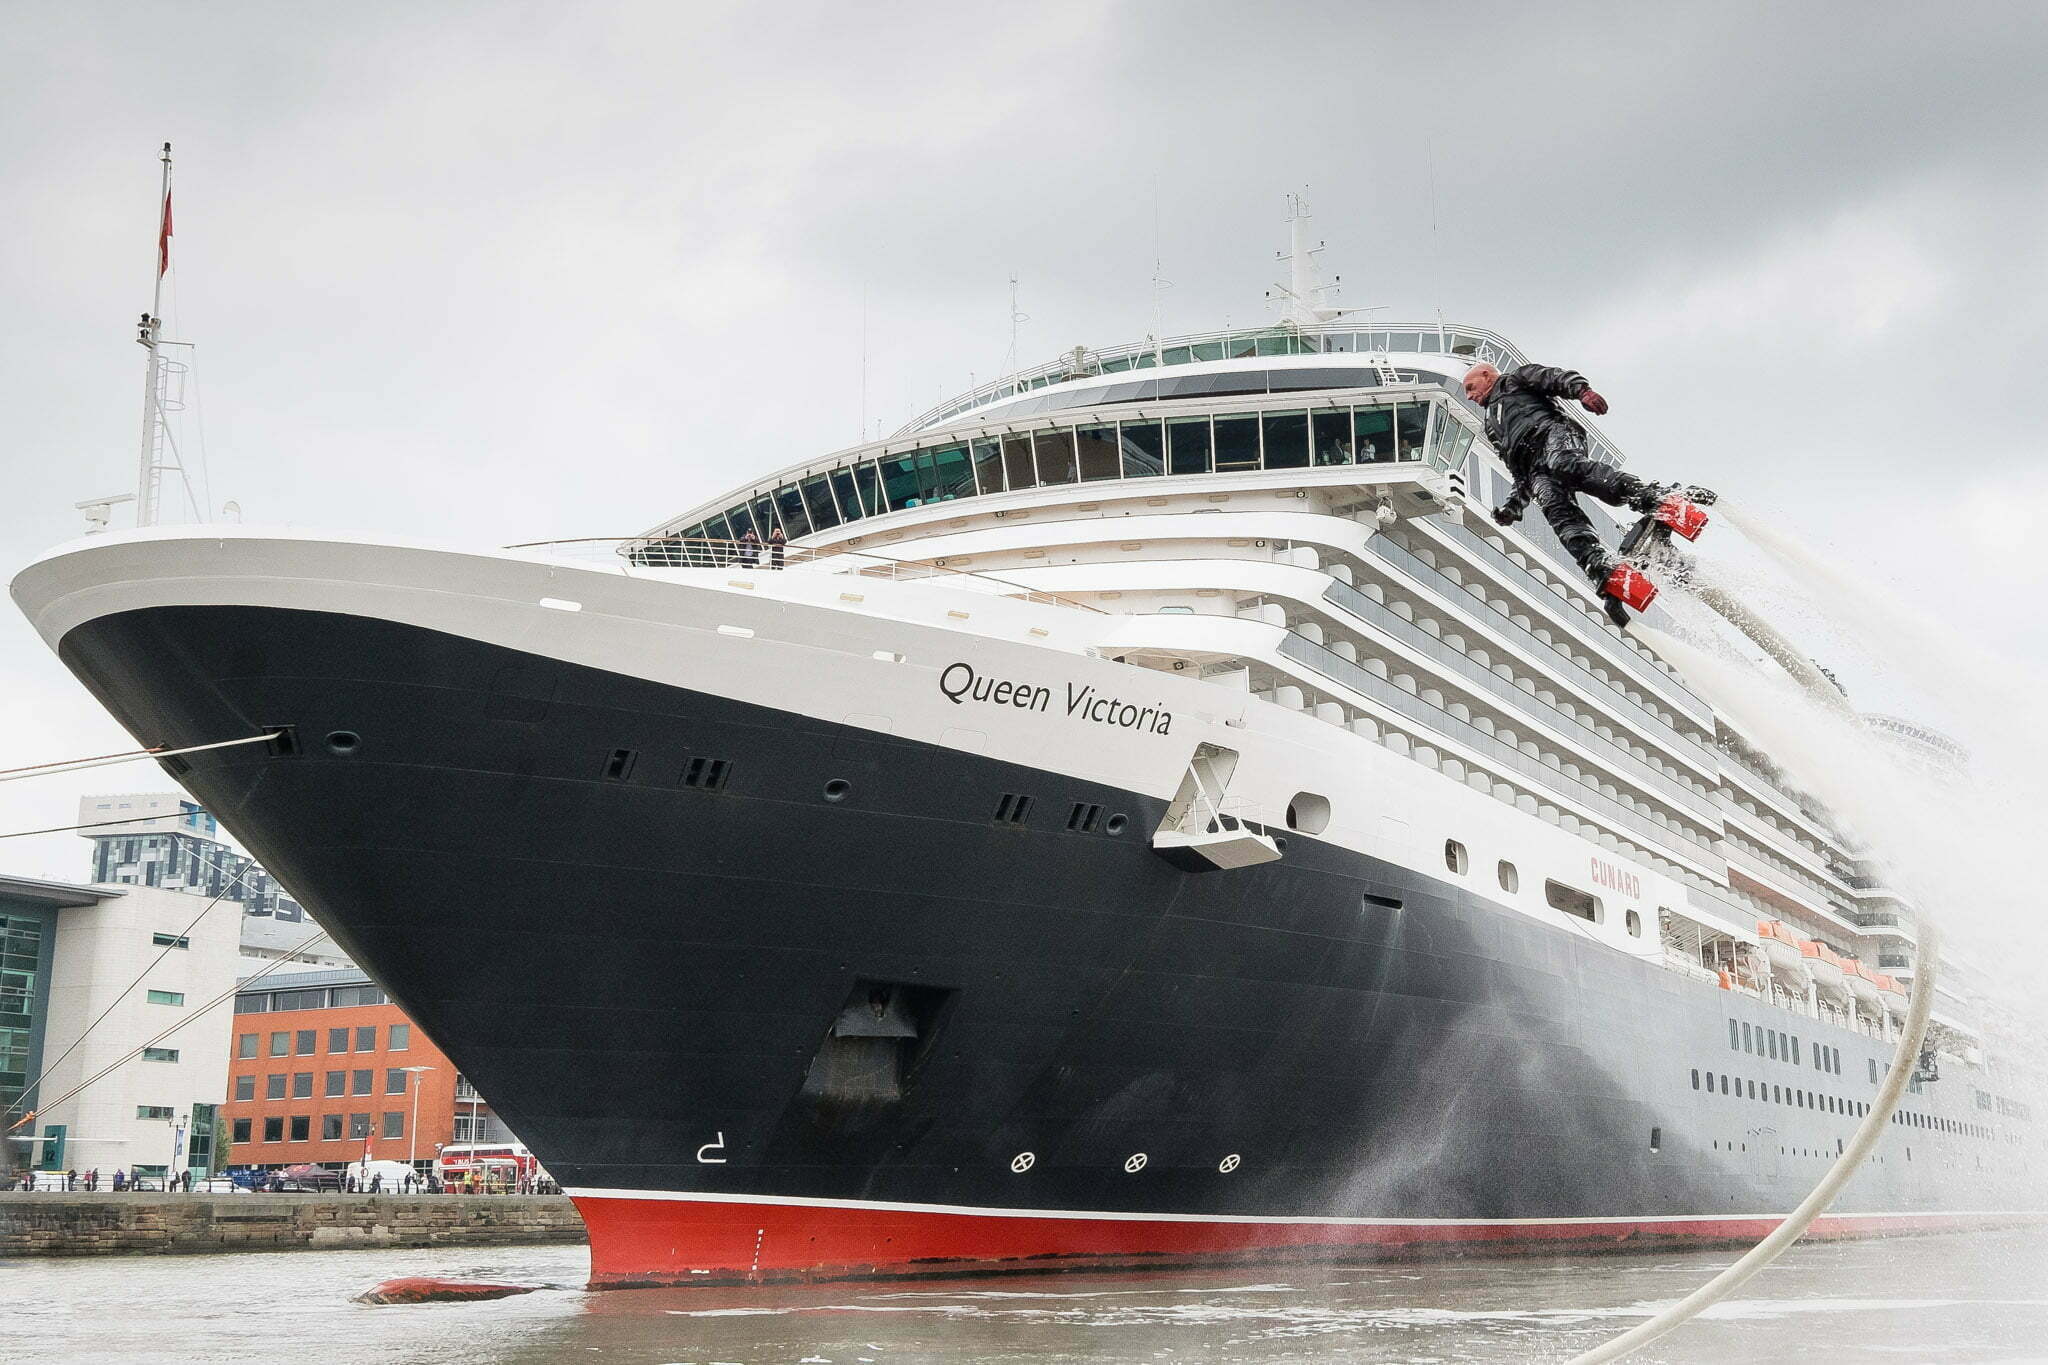 Cunard liner Queen Victoria arrives for the weekend in Liverpool, UK, 30th May, 2014. A man using a water based jet pack flies up to meet the captain of the Queen Victoria and welcome him to Liverpool.